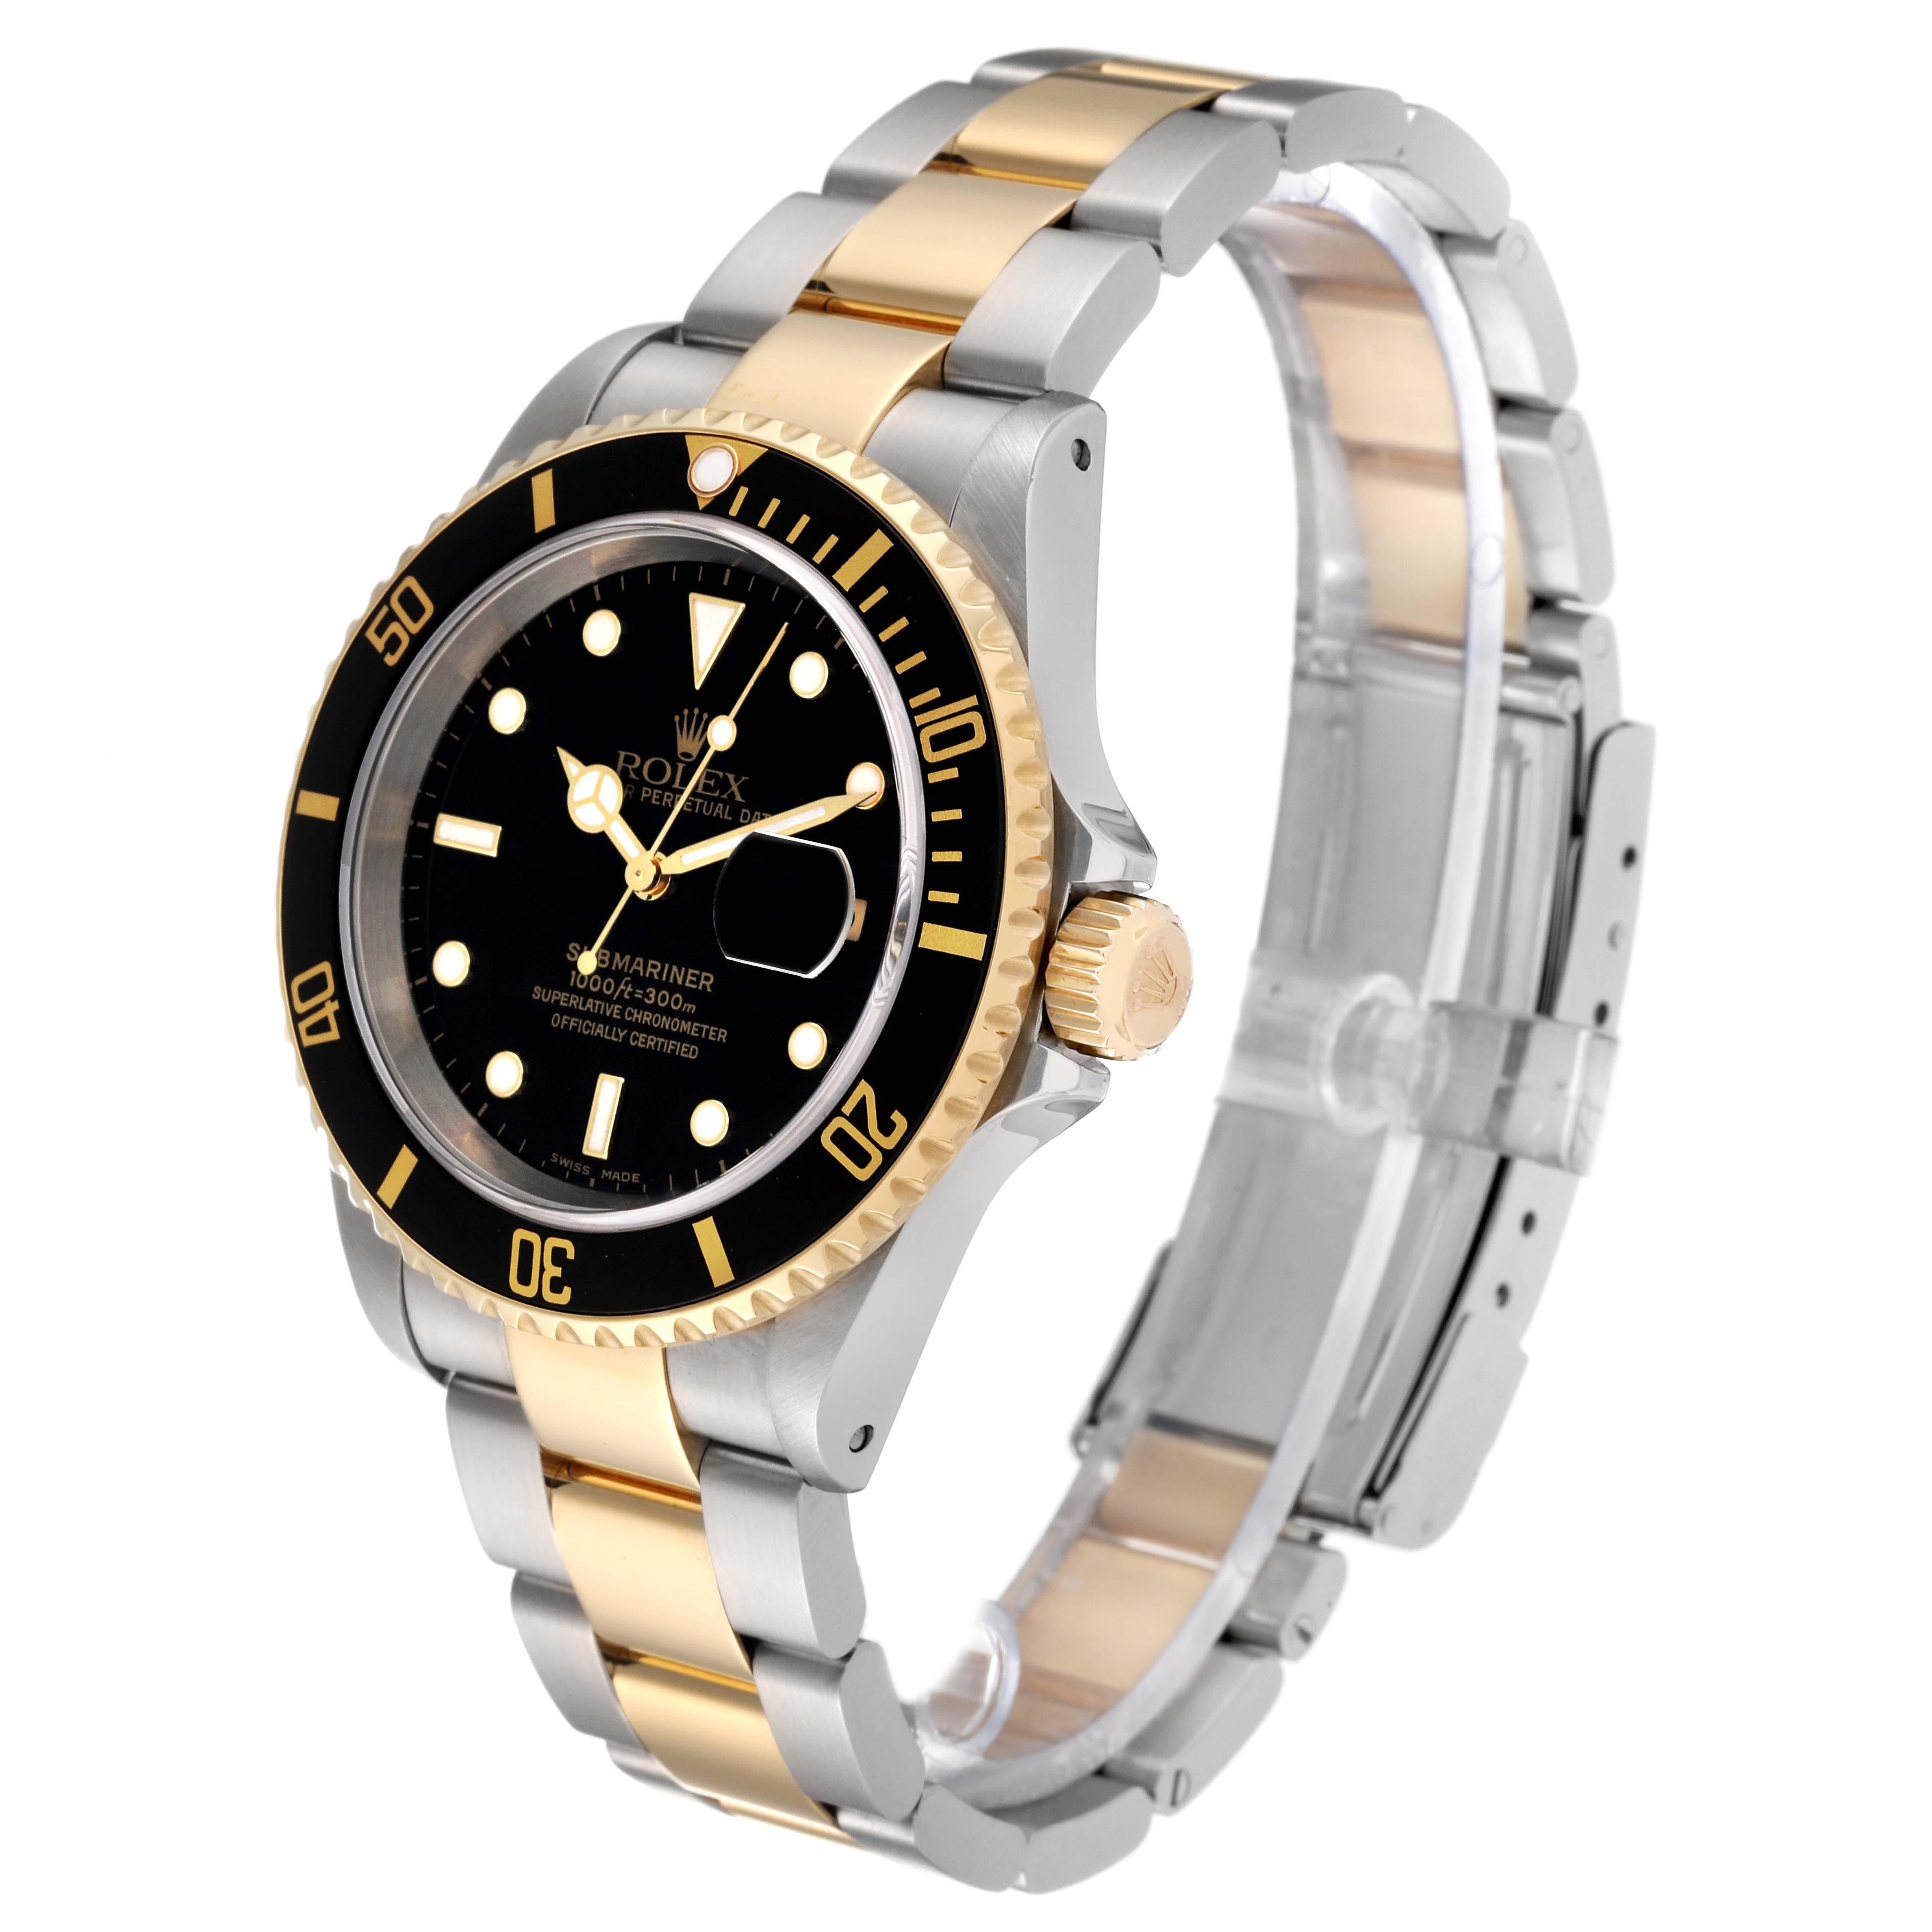 Rolex Submariner Steel Yellow Gold Black Dial Mens Watch 16613 Box Papers 5